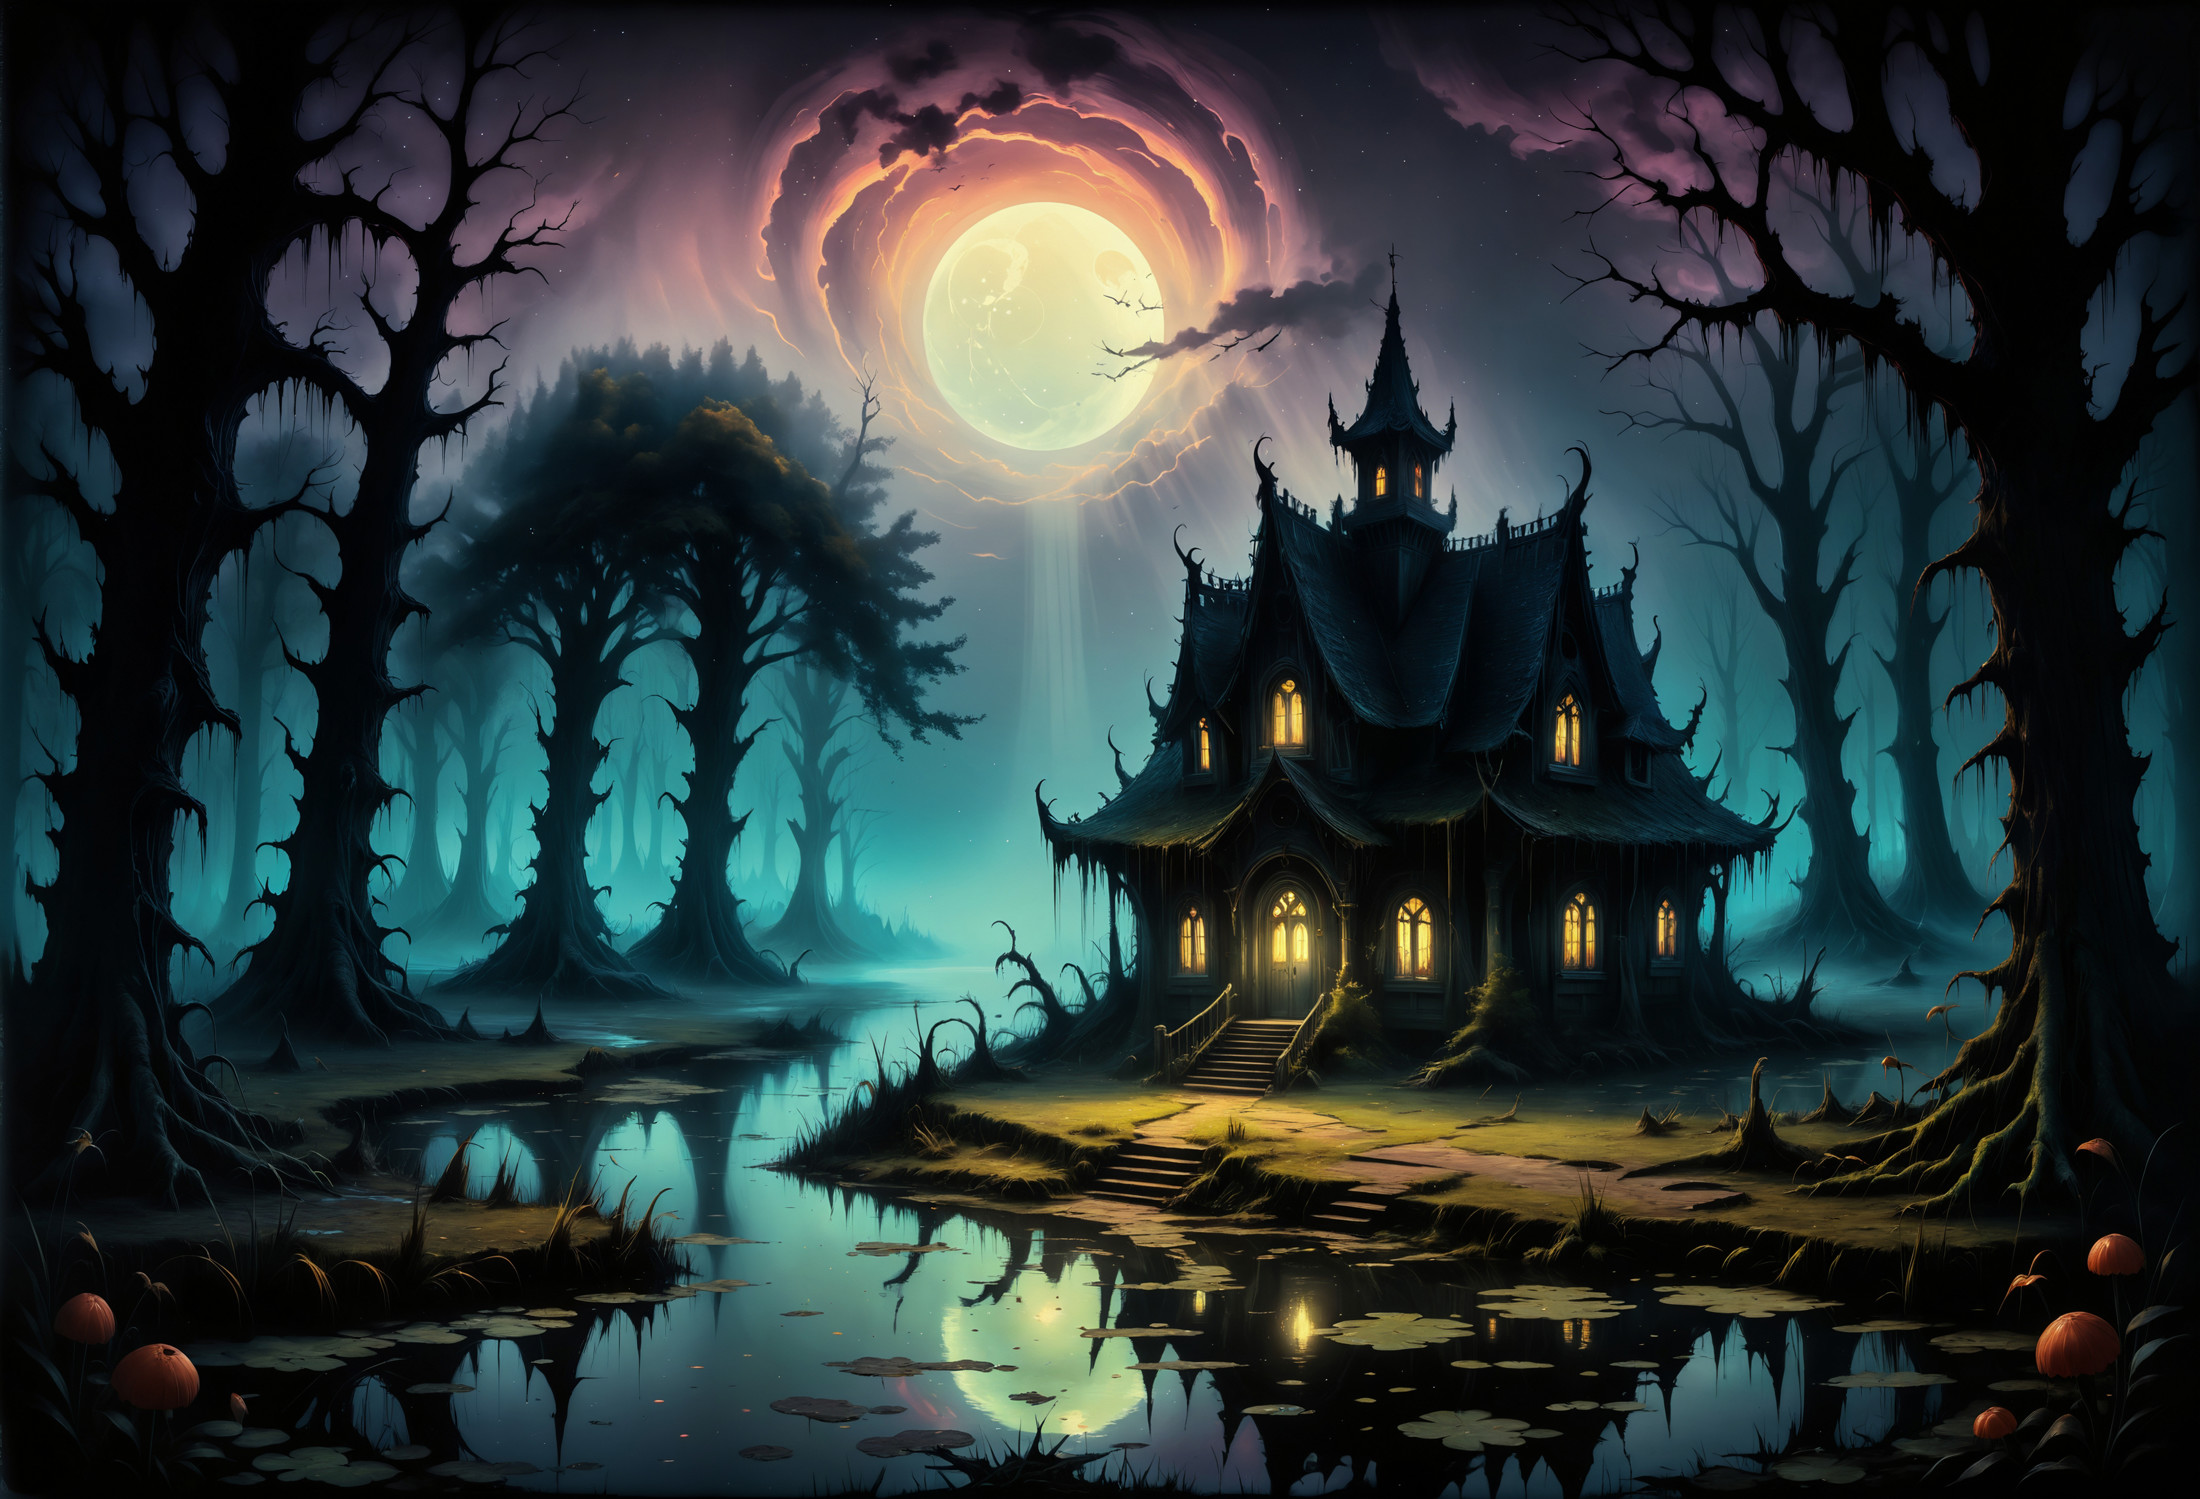 zavy-mthcl, summer, ink painting, acrylic, a creepy haunted house in a swamp at night with an eerie glow, by Craola, Dan M...